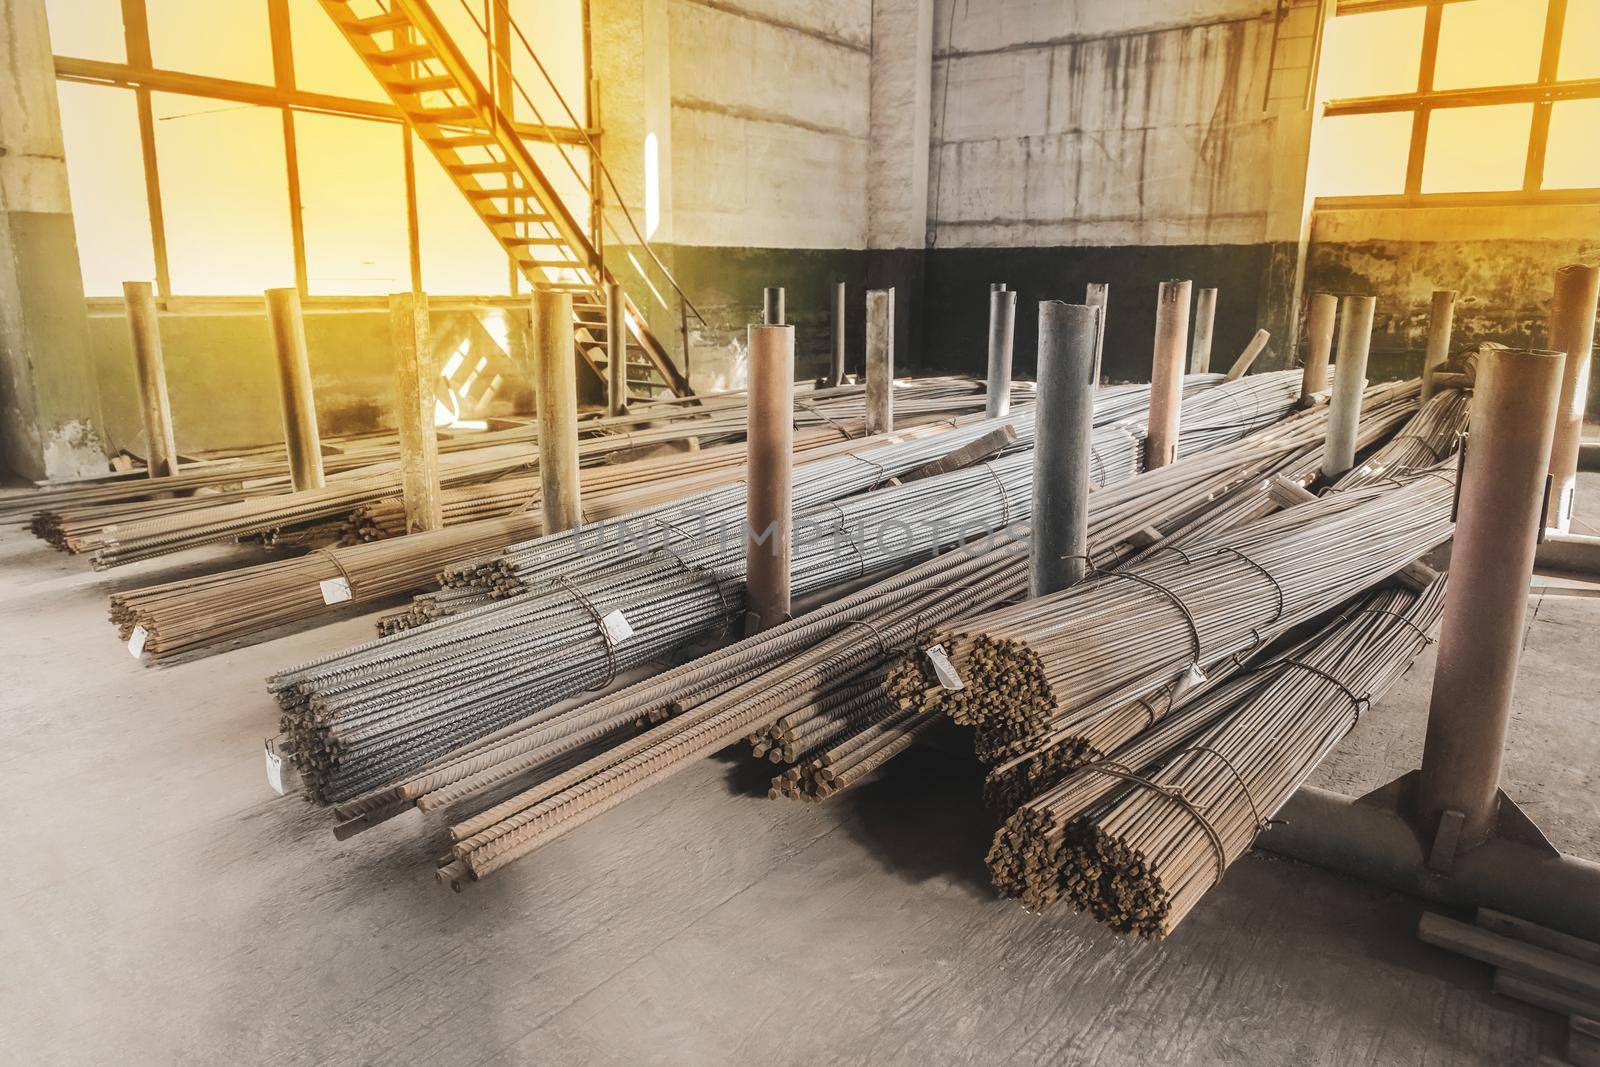 Storage of rebar or iron building materials in a warehouse or production hall of an industrial enterprise.